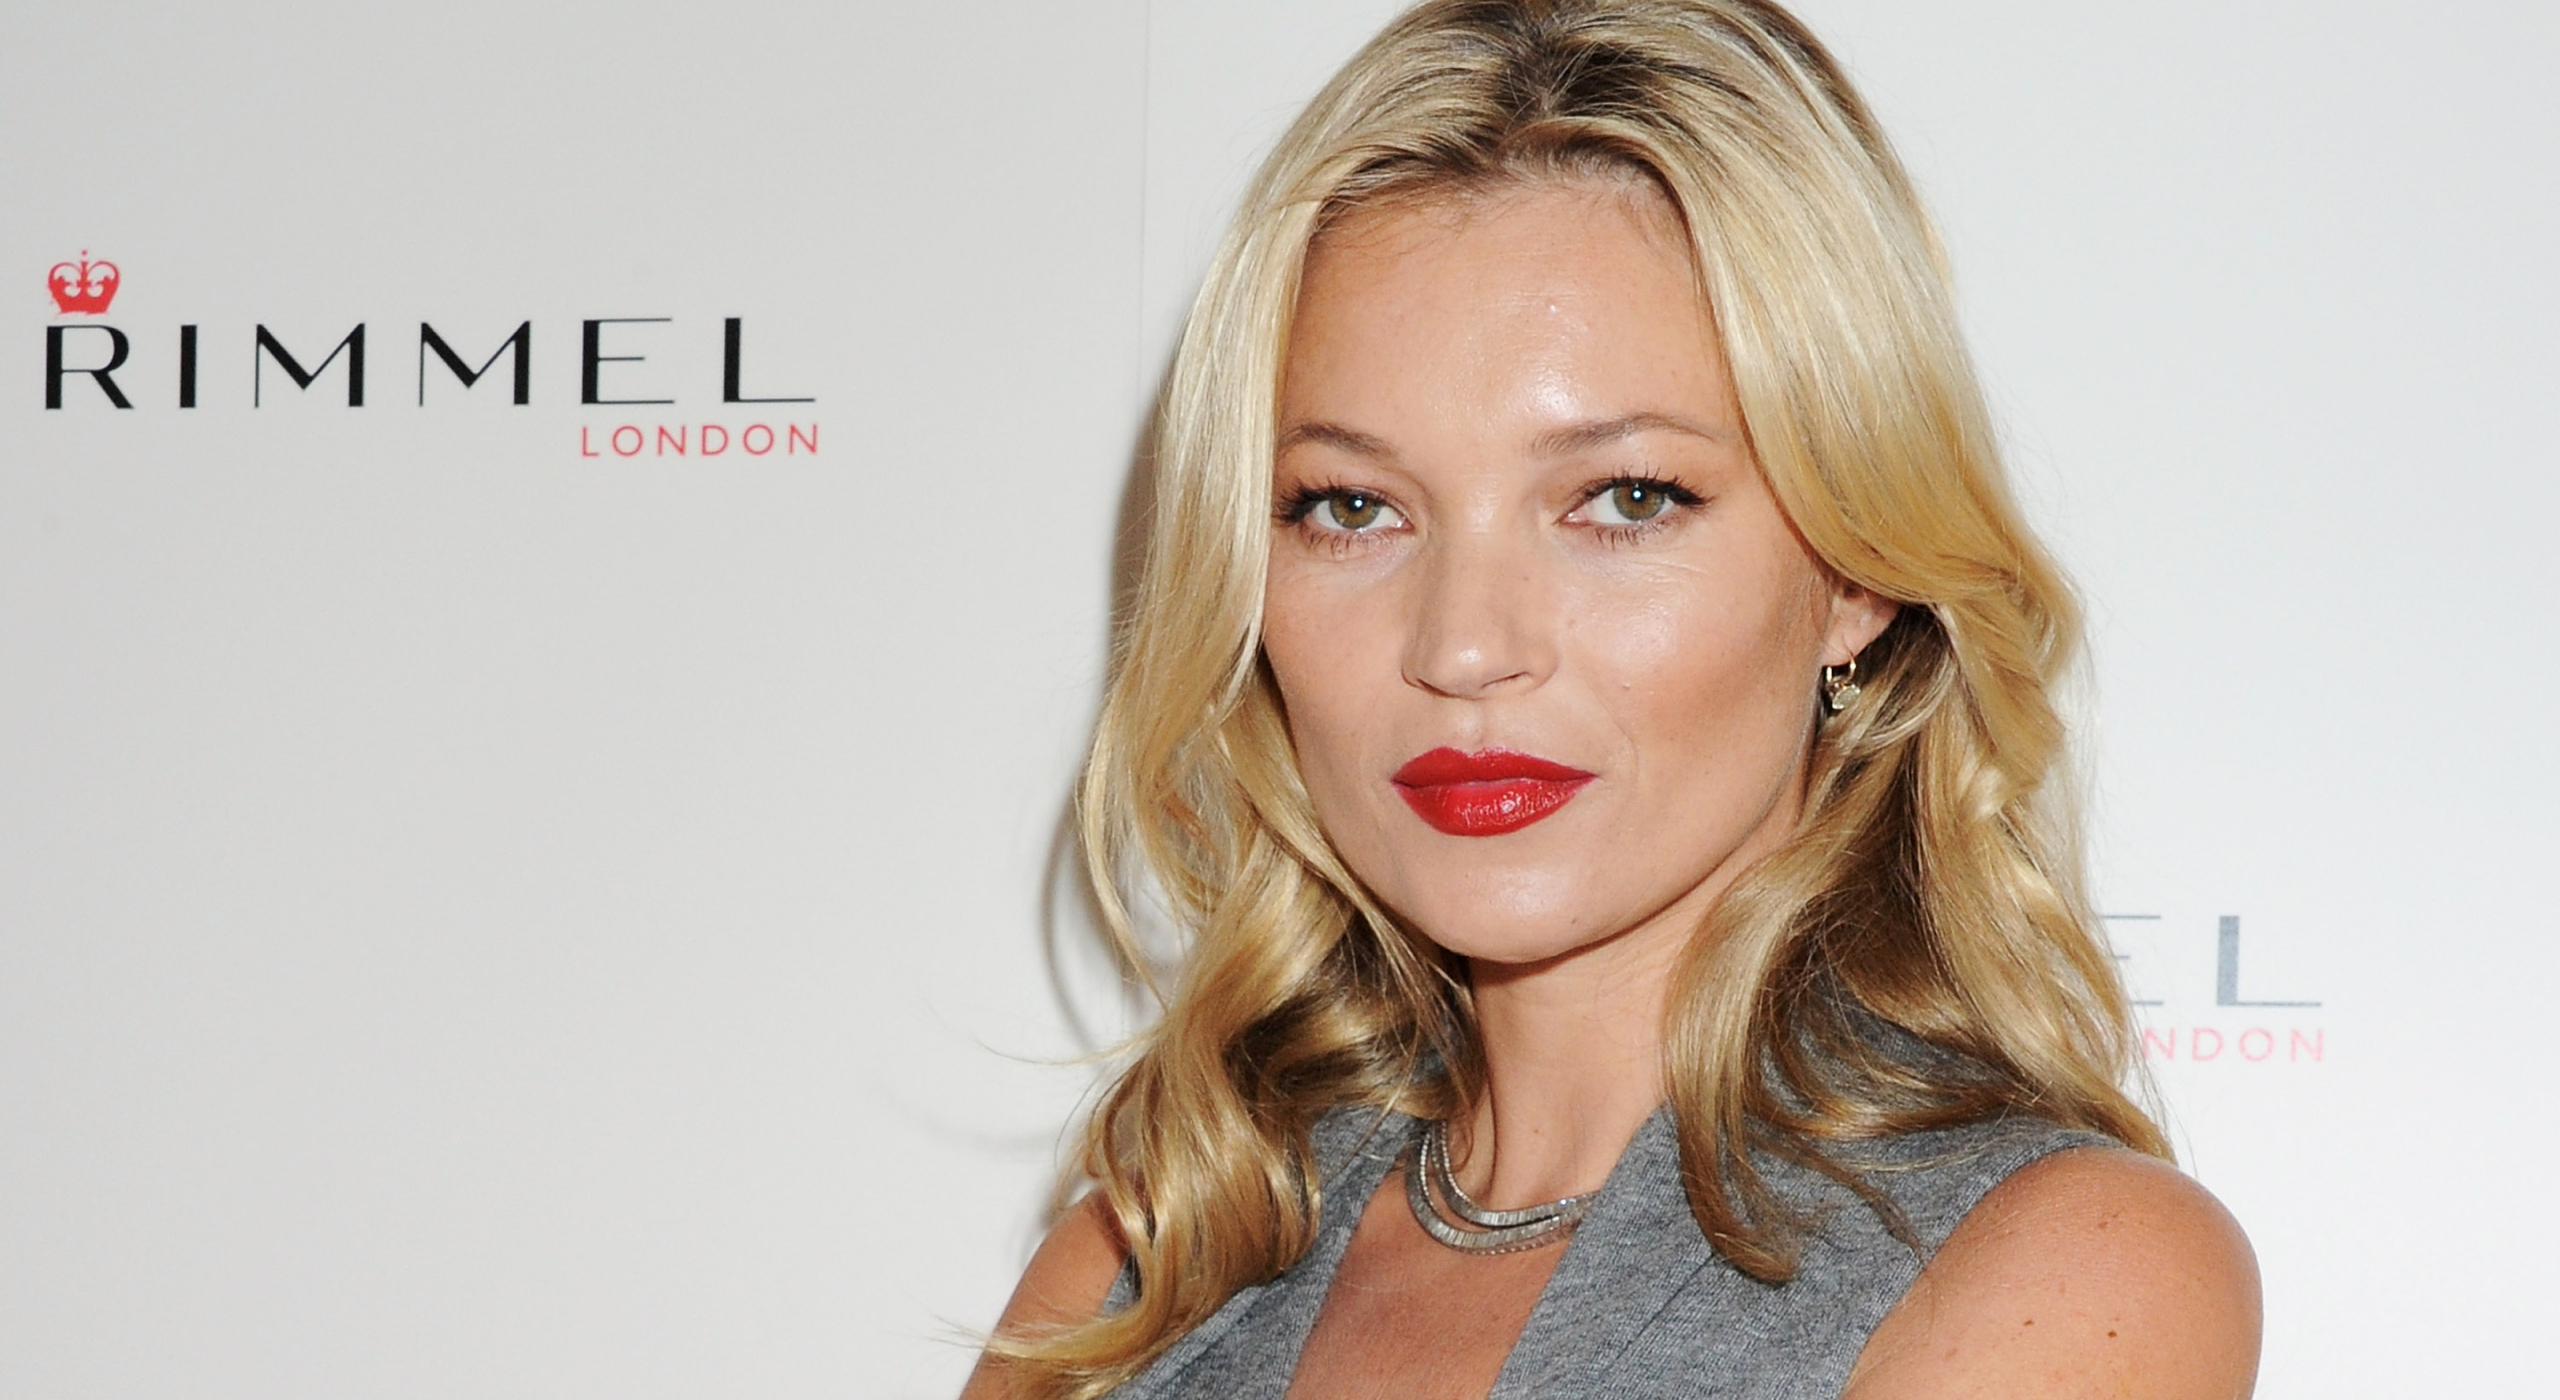 2560x1400 Resolution Kate Moss Poster Images 2560x1400 Resolution ...